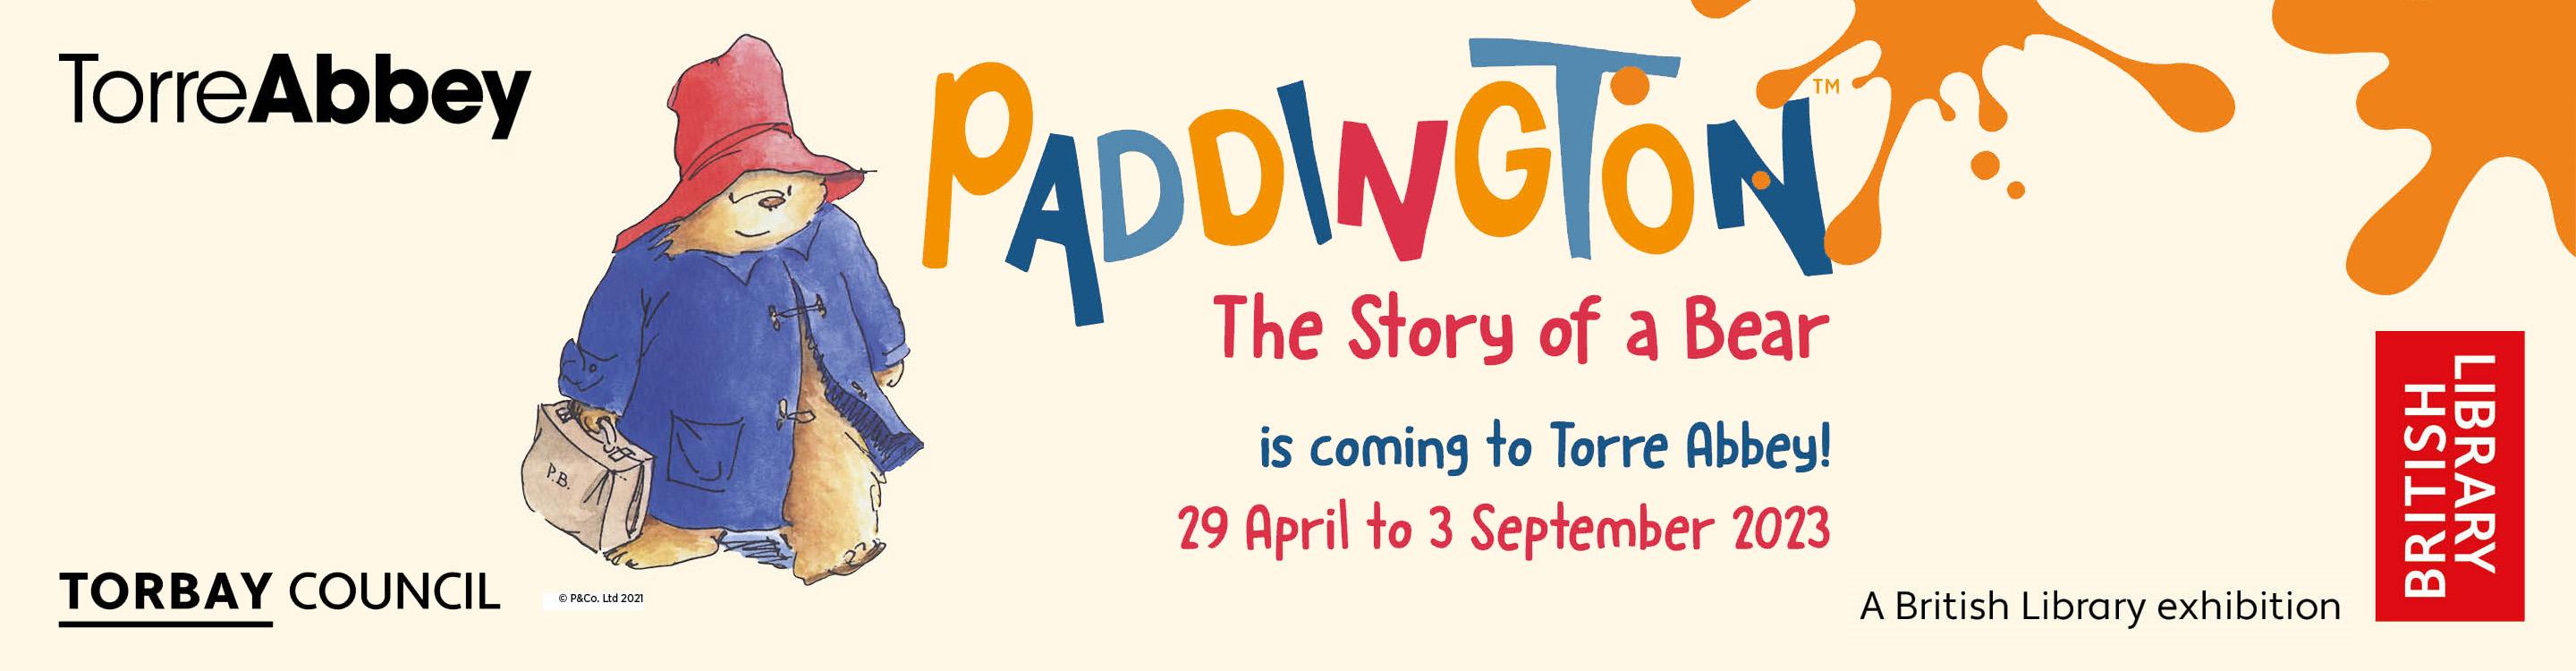 Everyone's favourite bear, Paddington, is coming to Torre Abbey as part of a British Library exhibition, 'The Story of a Bear', from 29 April to 3 September 2023.